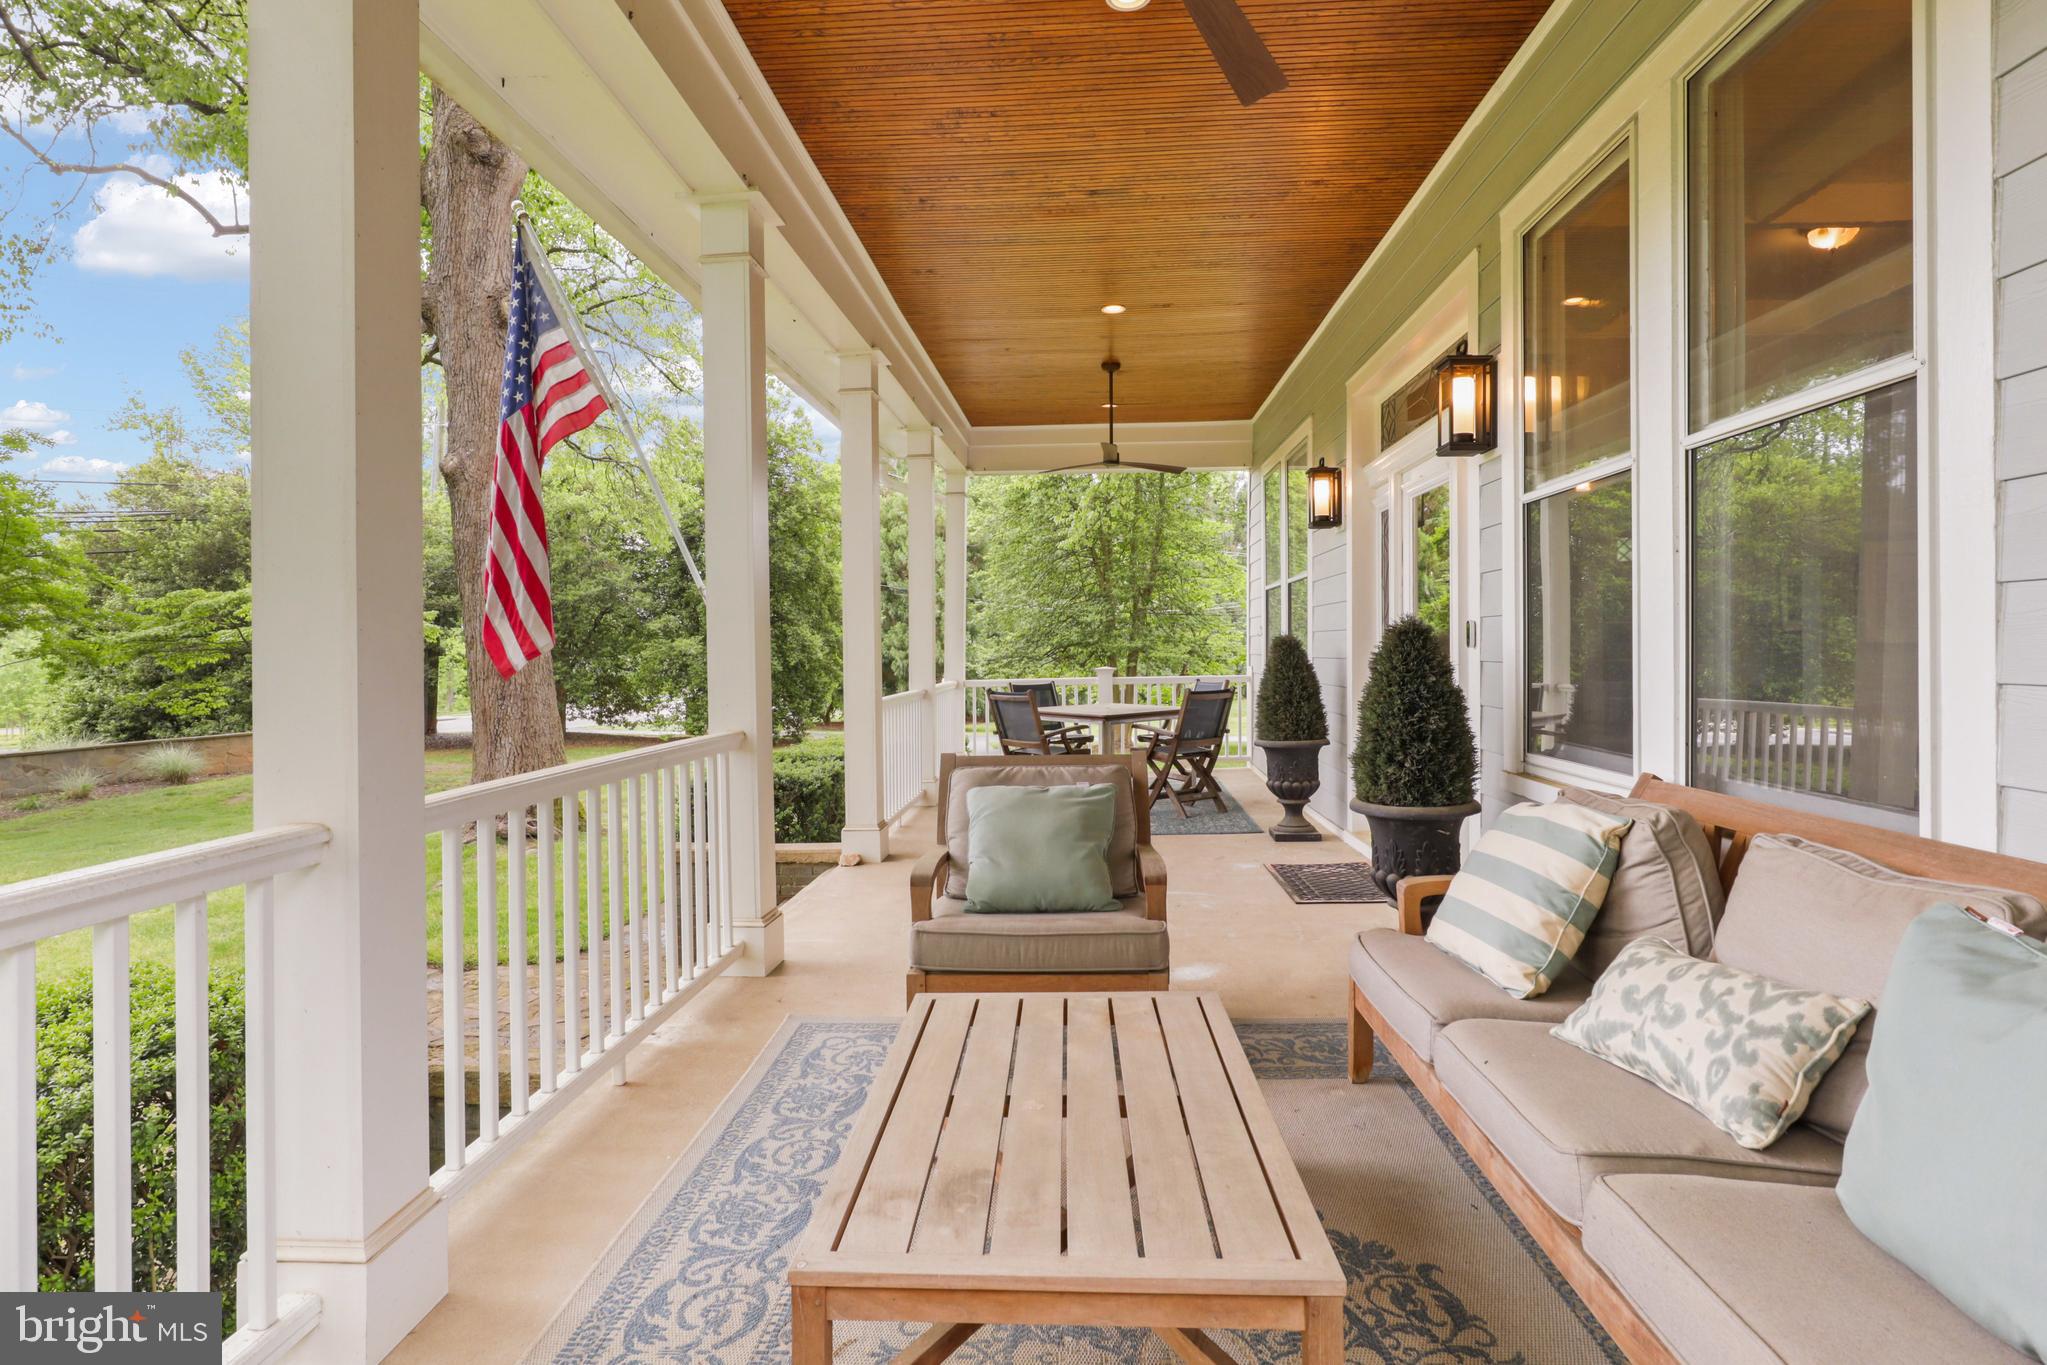 a view of porch with seating space